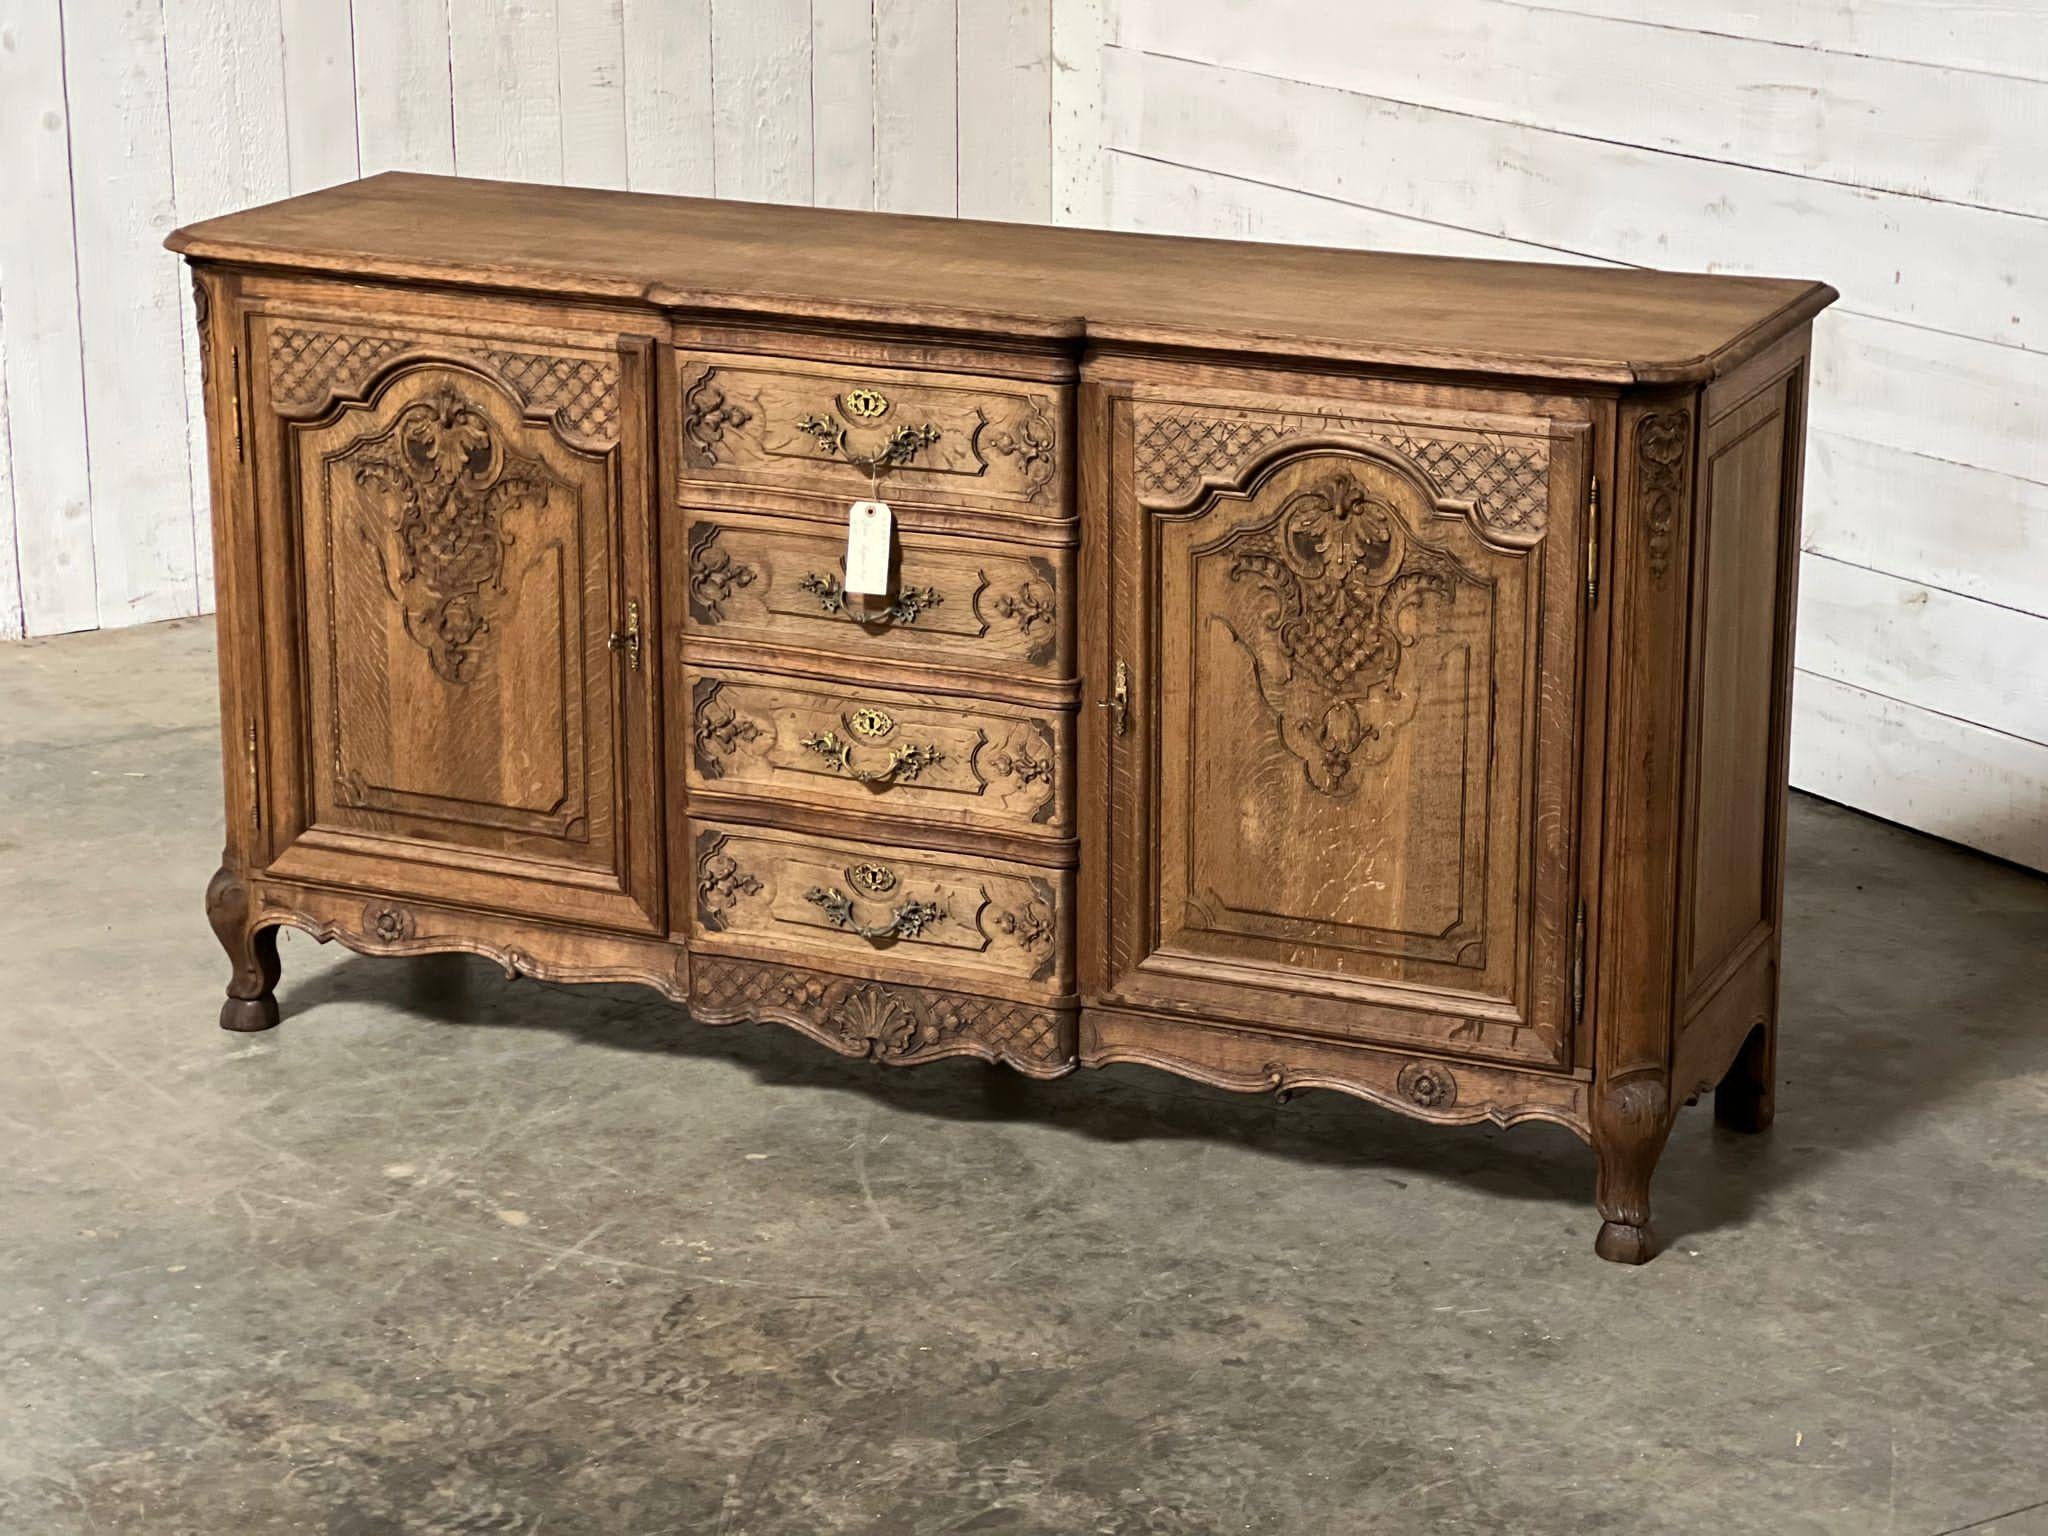 Lovely French Bleached Oak Sideboard or Enfilade 1